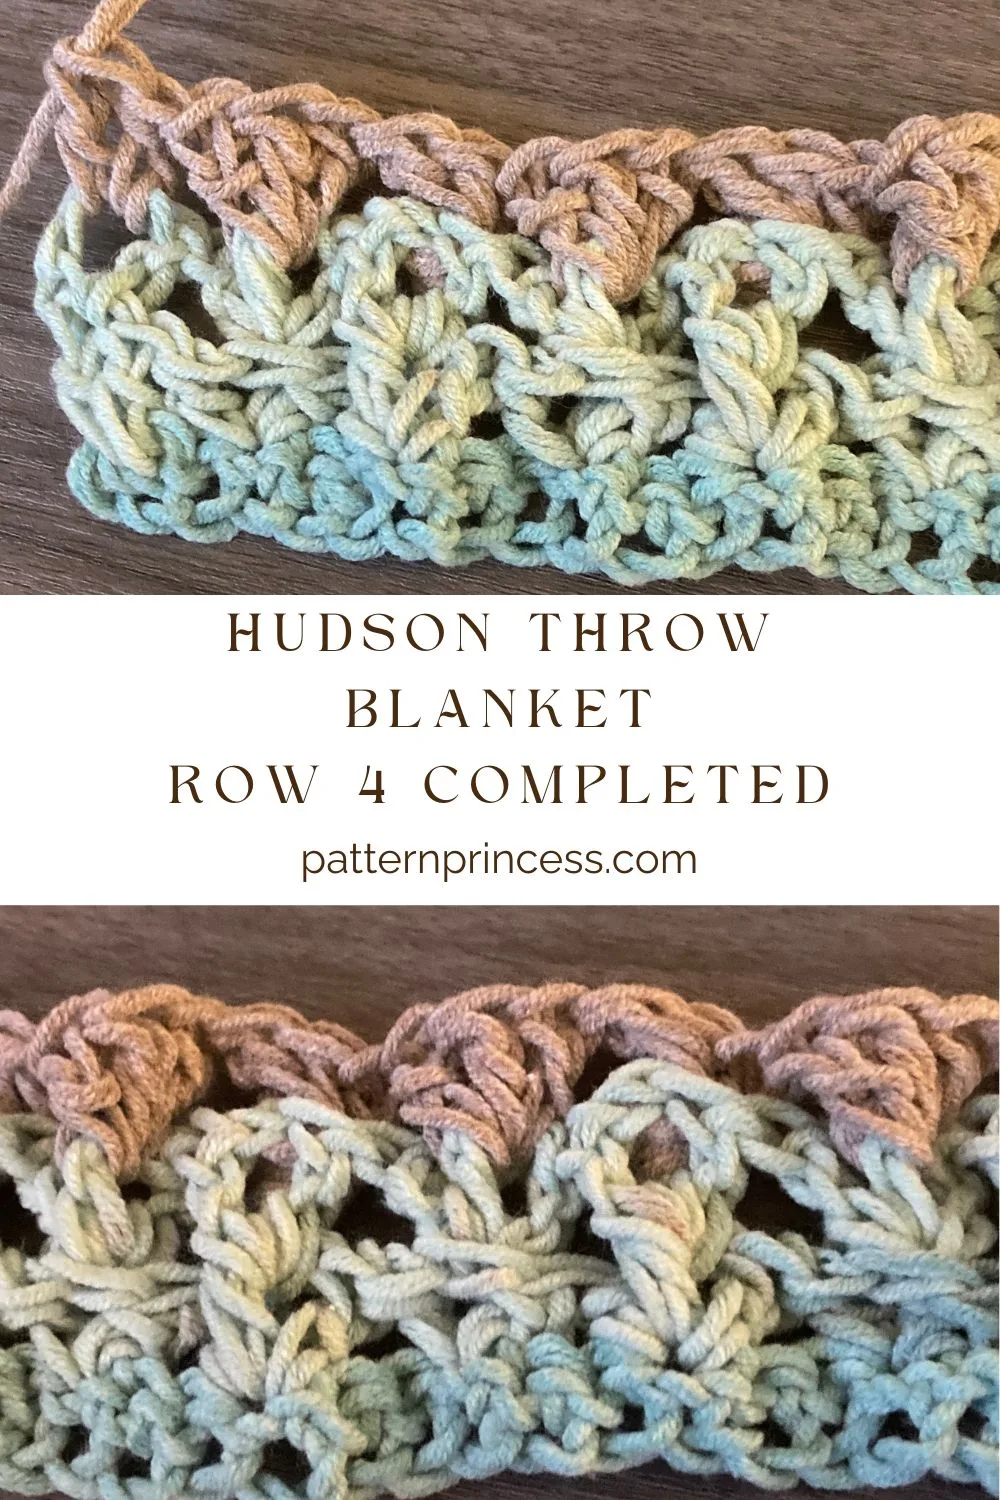 Hudson Throw Blanket row 4 completed